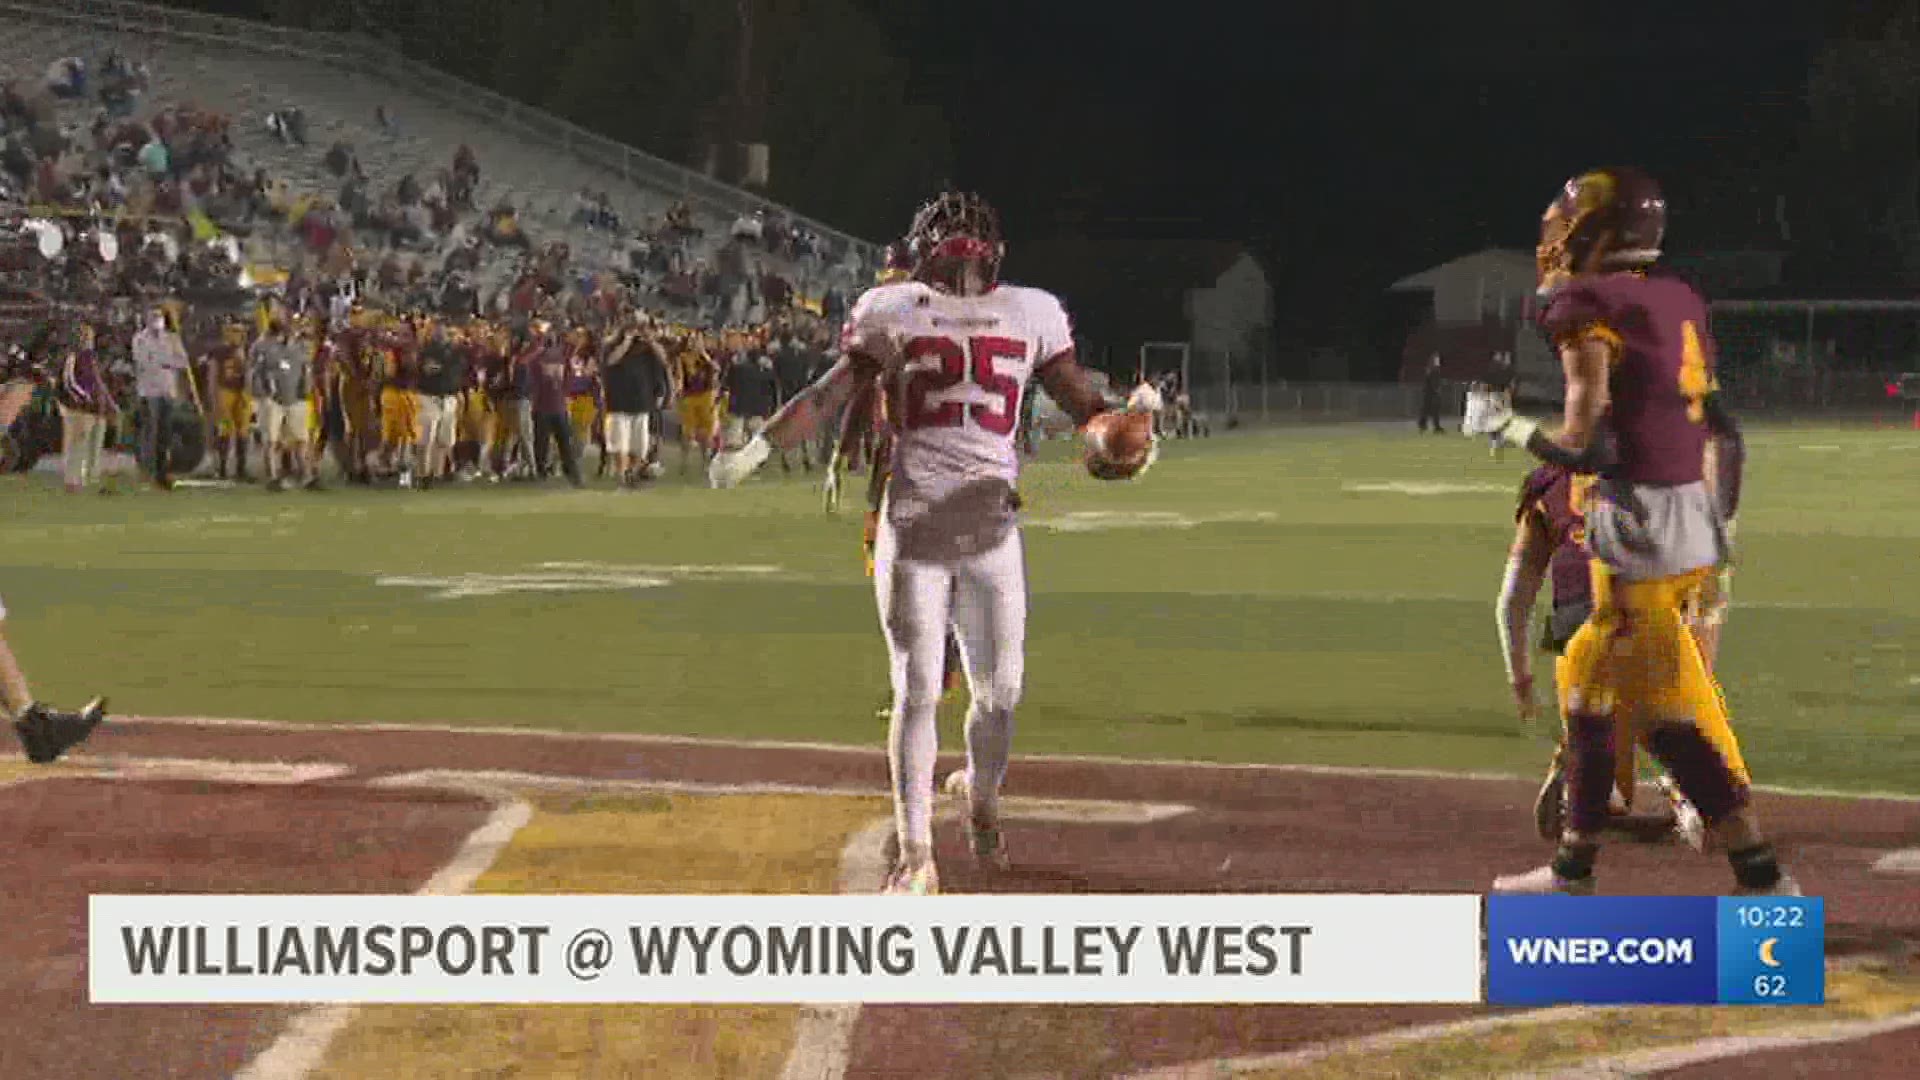 Williamsport vs Wyoming Valley West HSFB